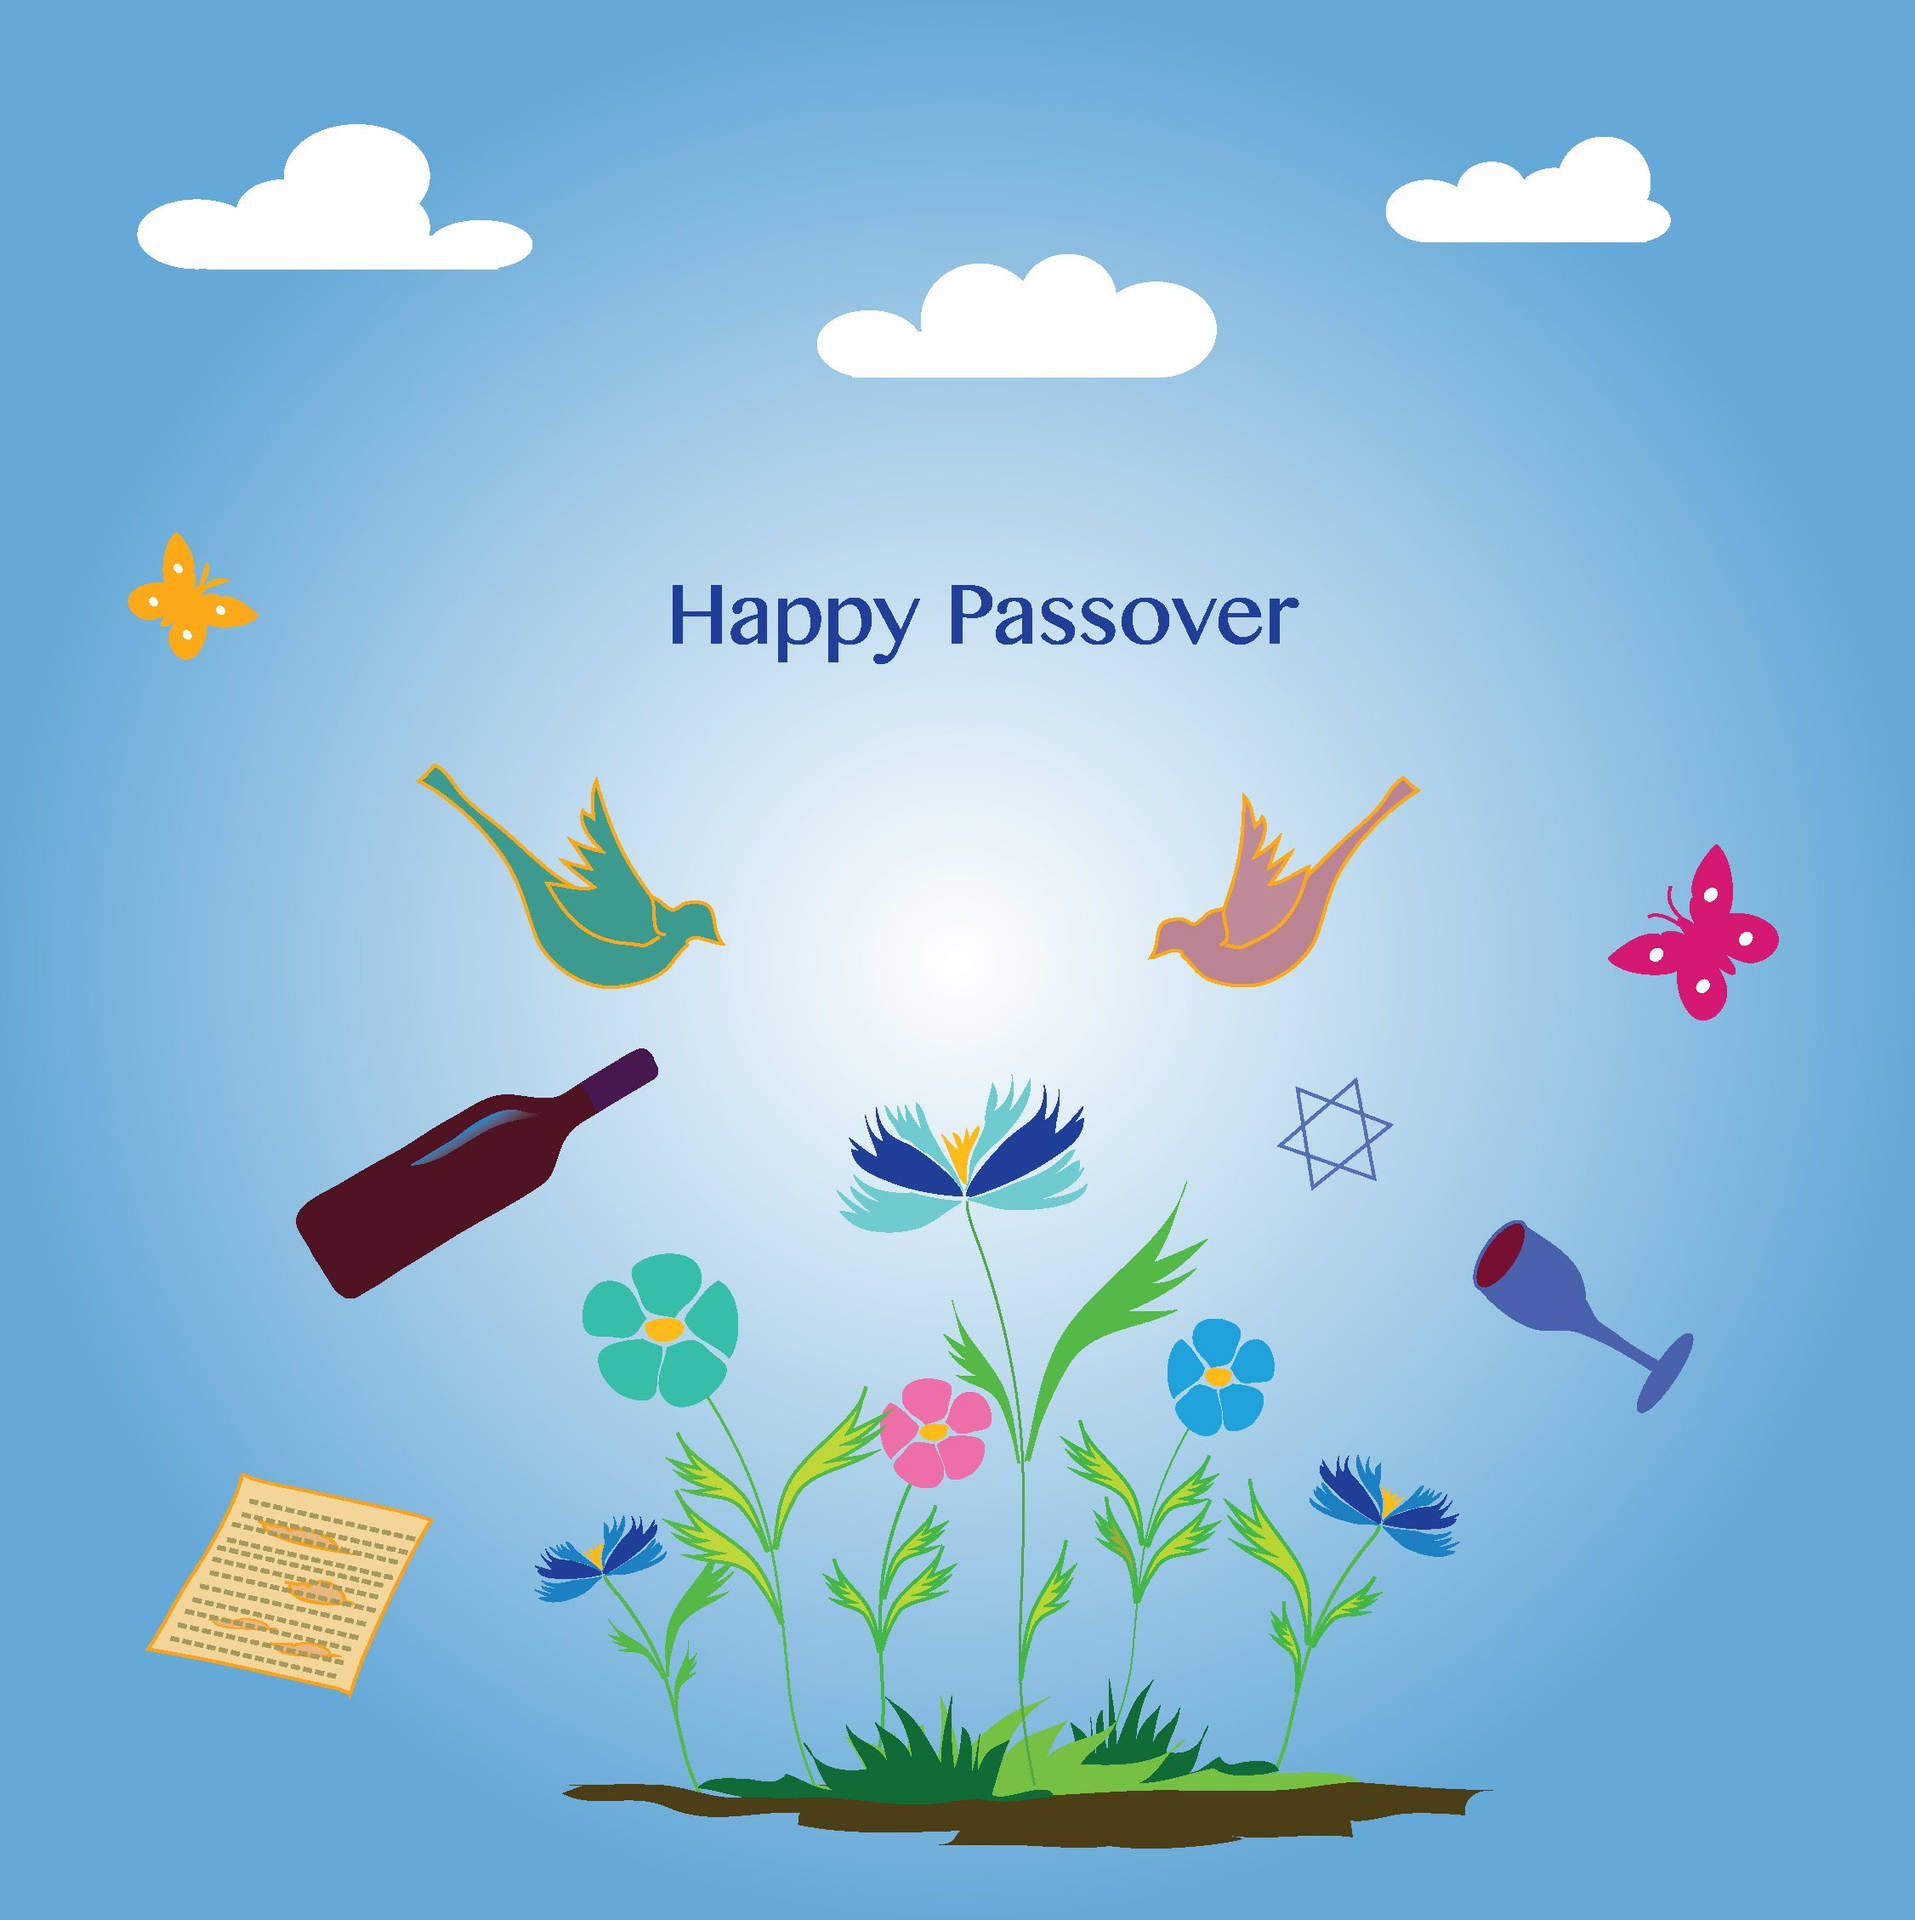 Happy Passover Greetings Background